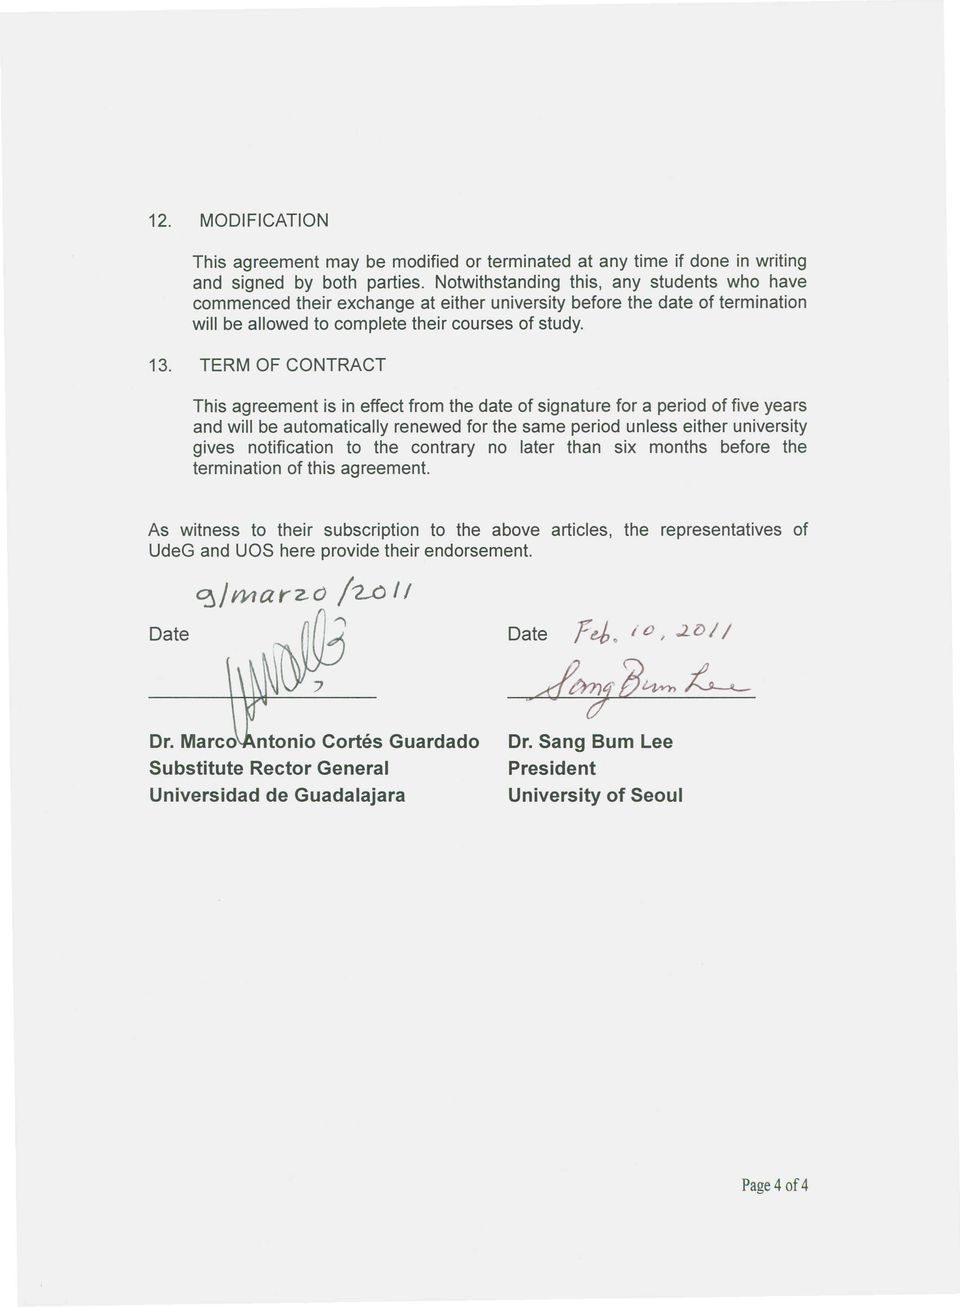 This agreement is in effect from the date of signature for a period of five years and will be automatically renewed for the same period unless either university gives notification to the contrary no